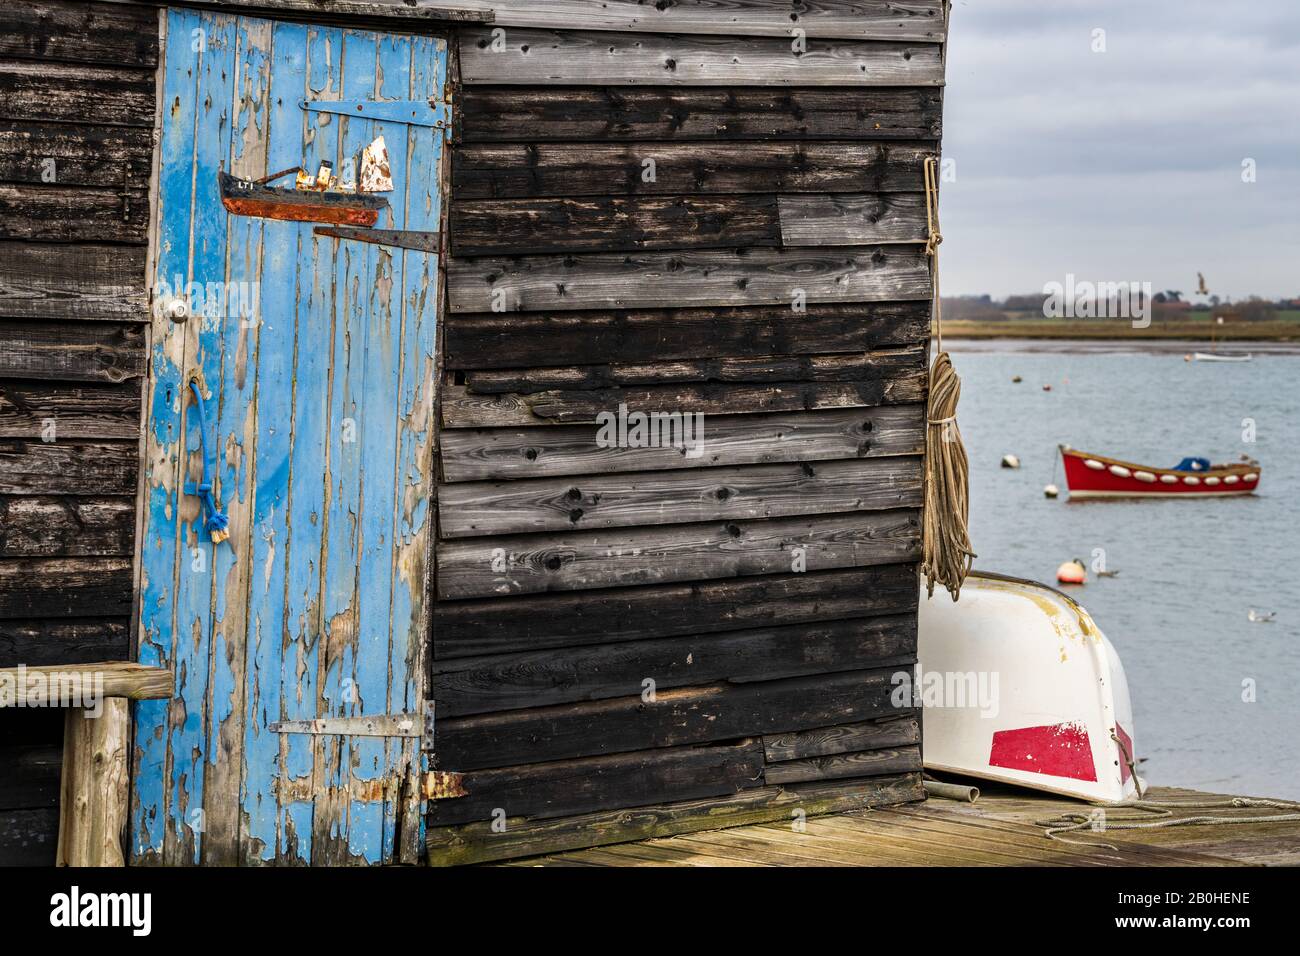 Old fisherman's huts at Felixstowe Ferry, a small fishing village located  2 miles north of Felixstowe in Suffolk. Herring drifter plaque on door. Stock Photo